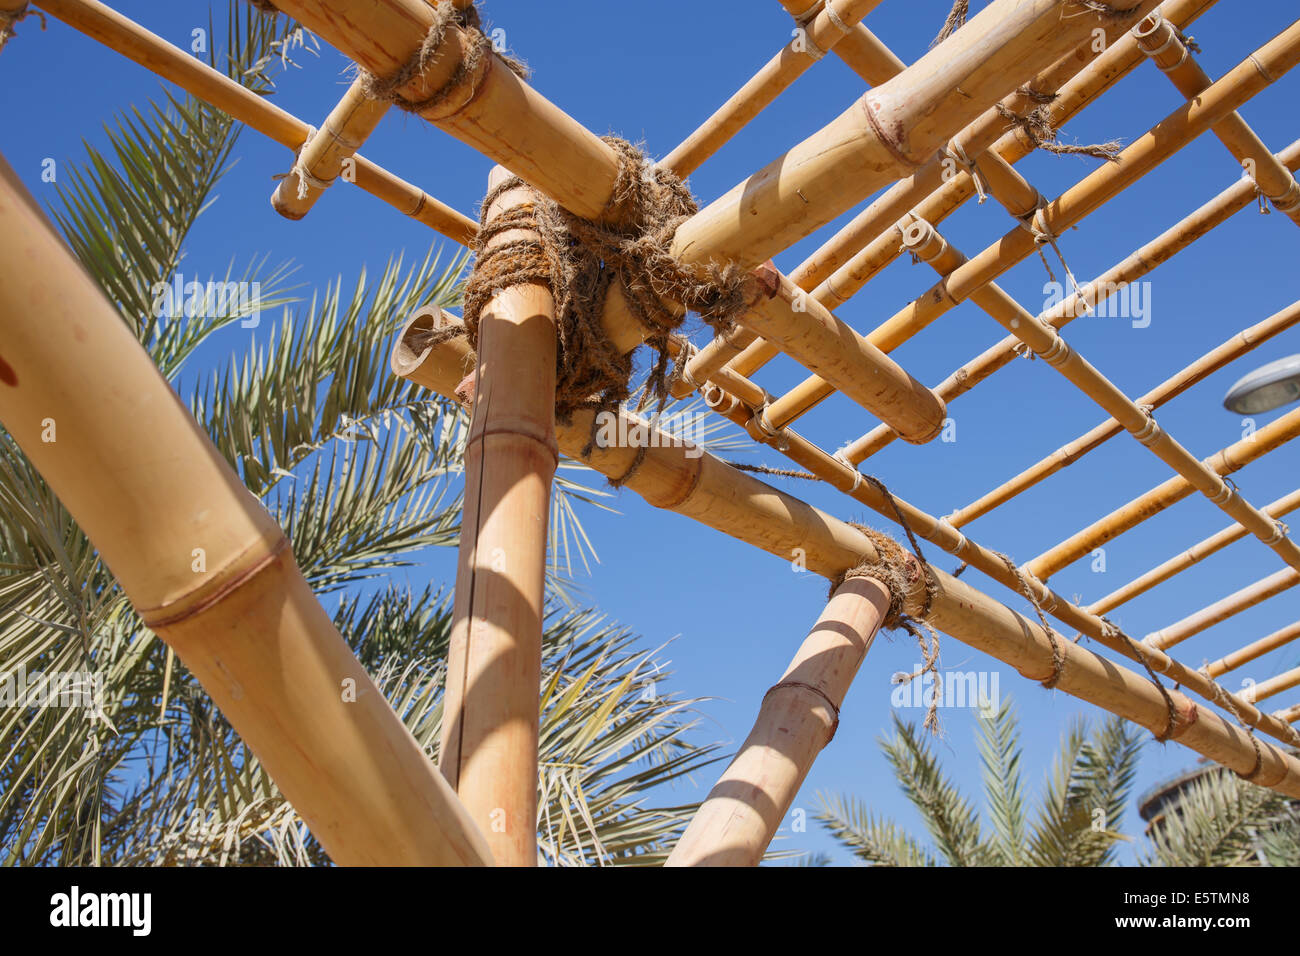 bamboo cage against the blue sky Stock Photo